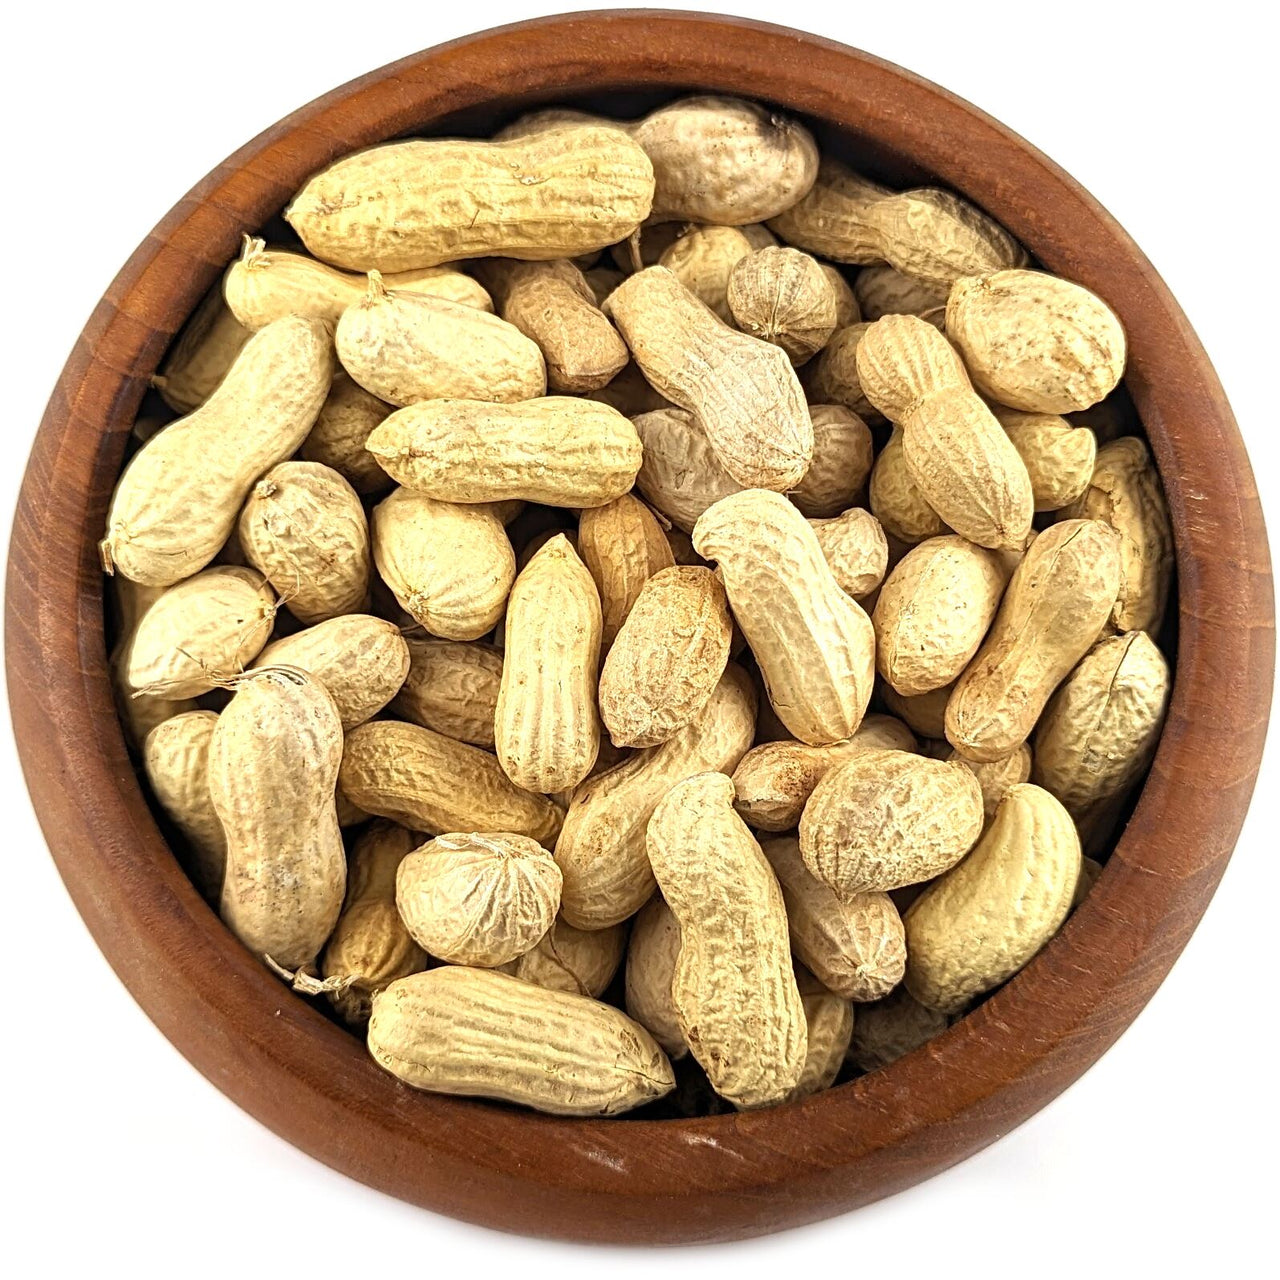 Peanuts in Shell, 11.33kg Sack